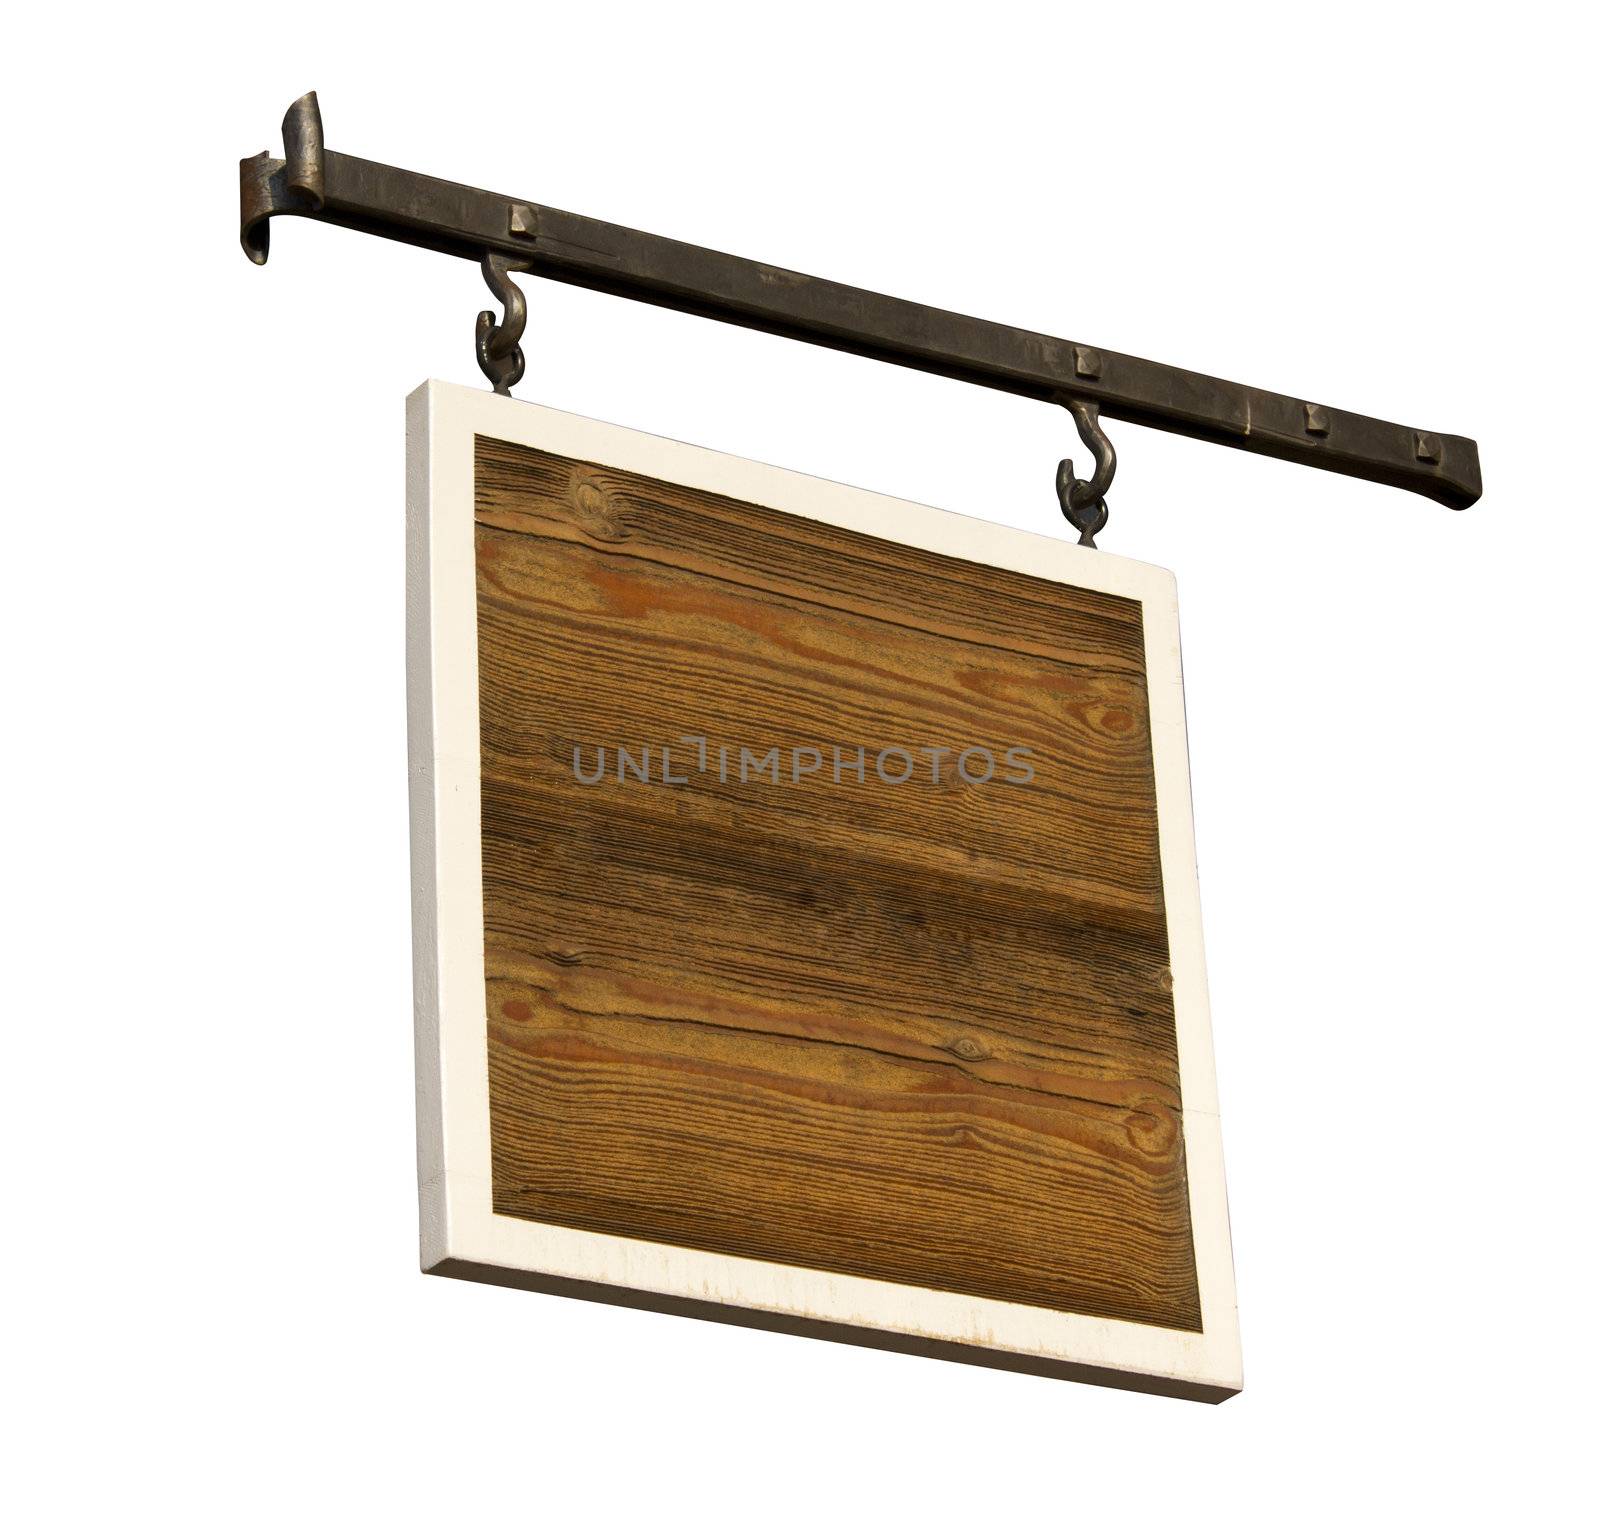 Old wooden hanging message board by jeremywhat